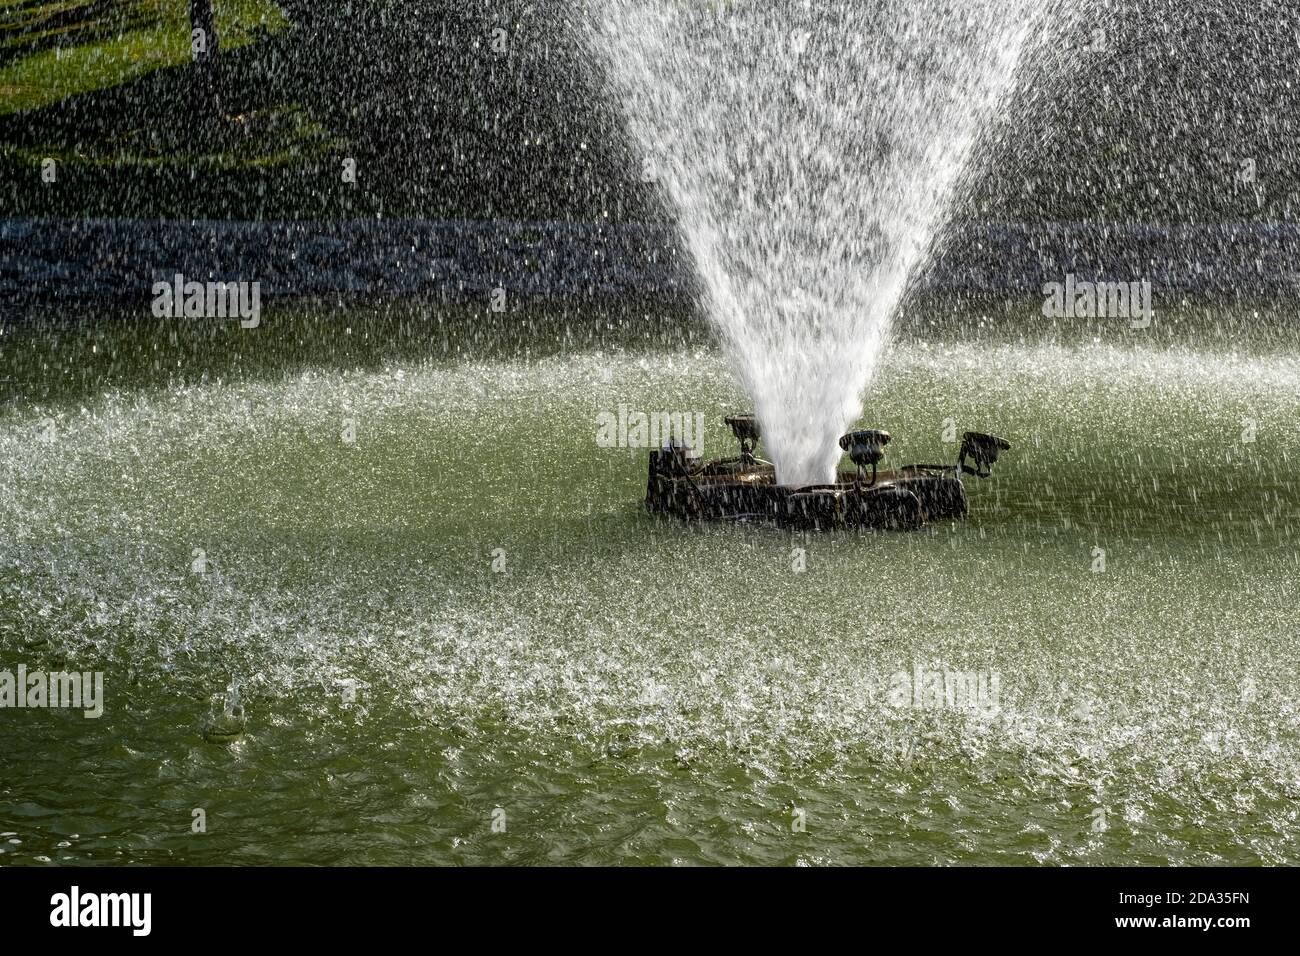 View of a water fountain spraying water in a pond in a public park. Stock Photo